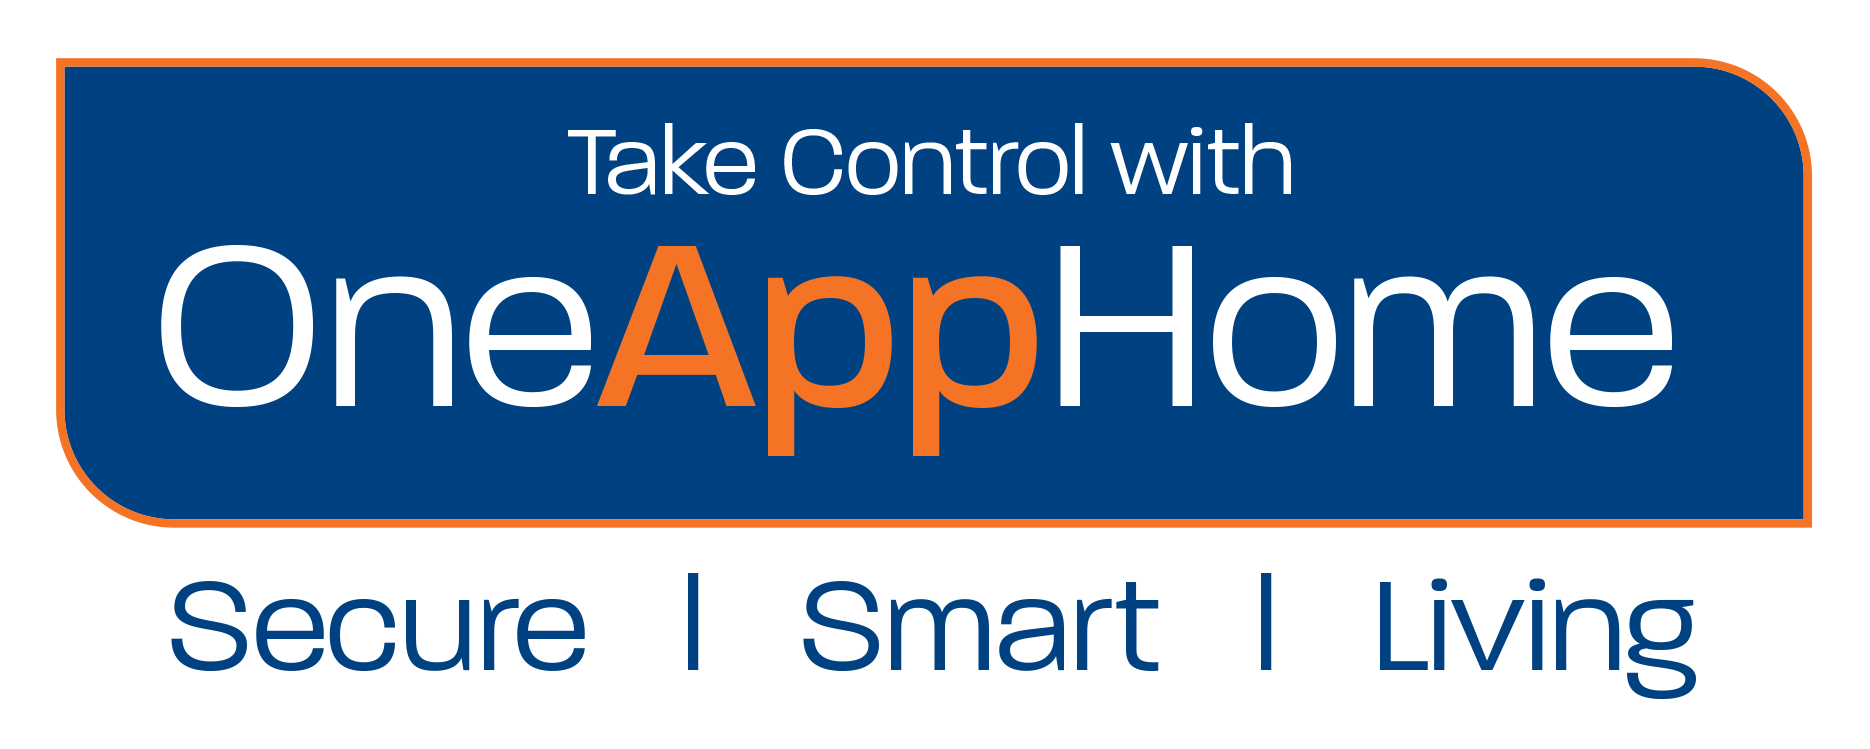 OneAppHome